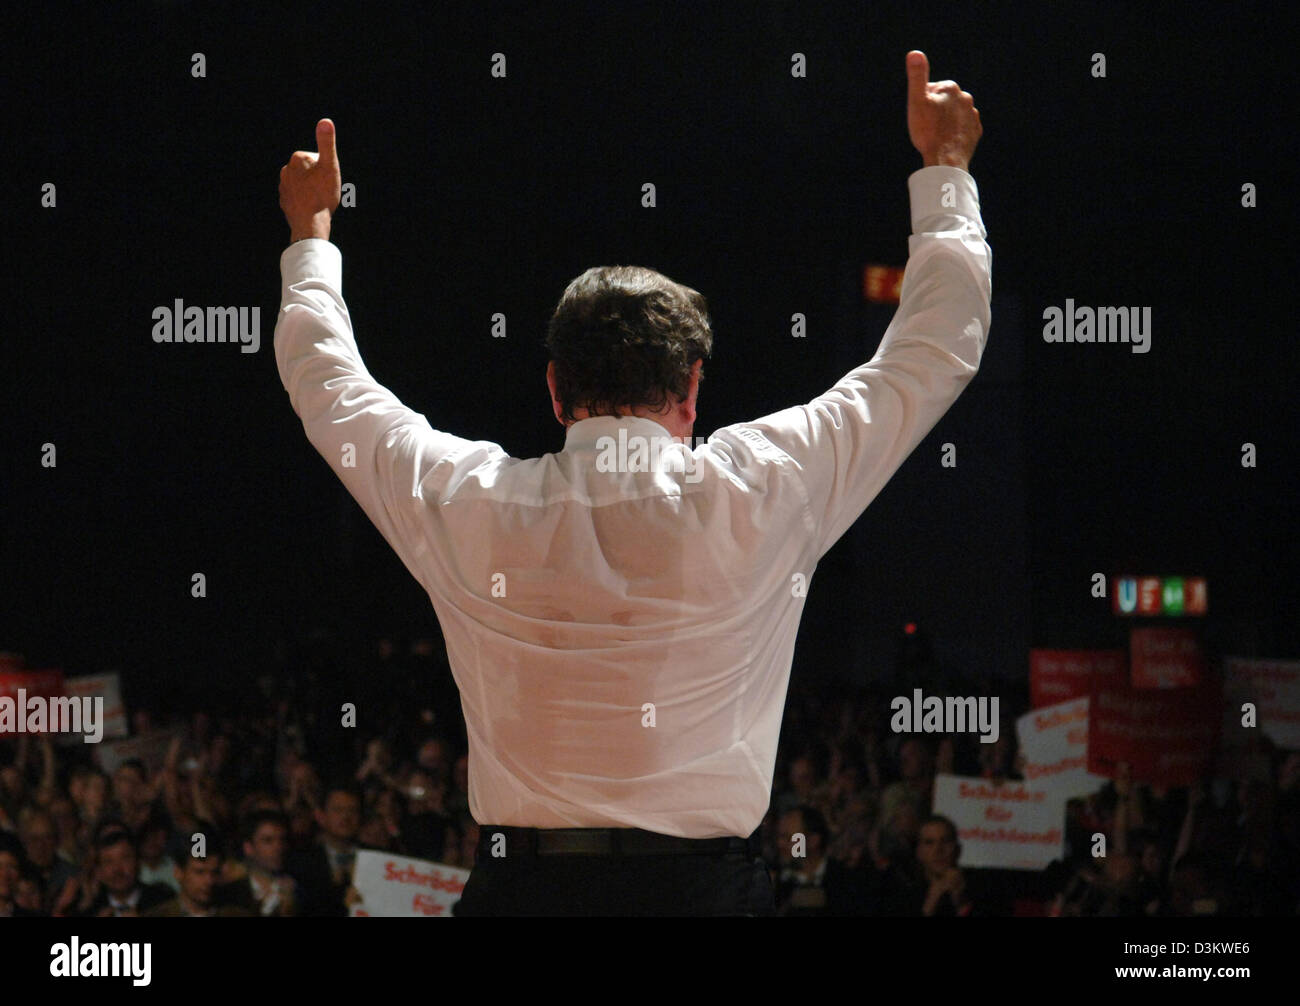 (dpa) - German Chancellor Gerhard Schroeder (SPD) strikes a pose during an election campaign rally in Hamburg, Germany, 14 September 2005. Proir to that, Schroeder held a speech with the motto 'Vertrauen in Deutschland' (Trust in Germany) in front of the party's sympathisers. Germany's general elections will be held on Sunday 18 September 2005. Photo: Kay Nietfeld Stock Photo